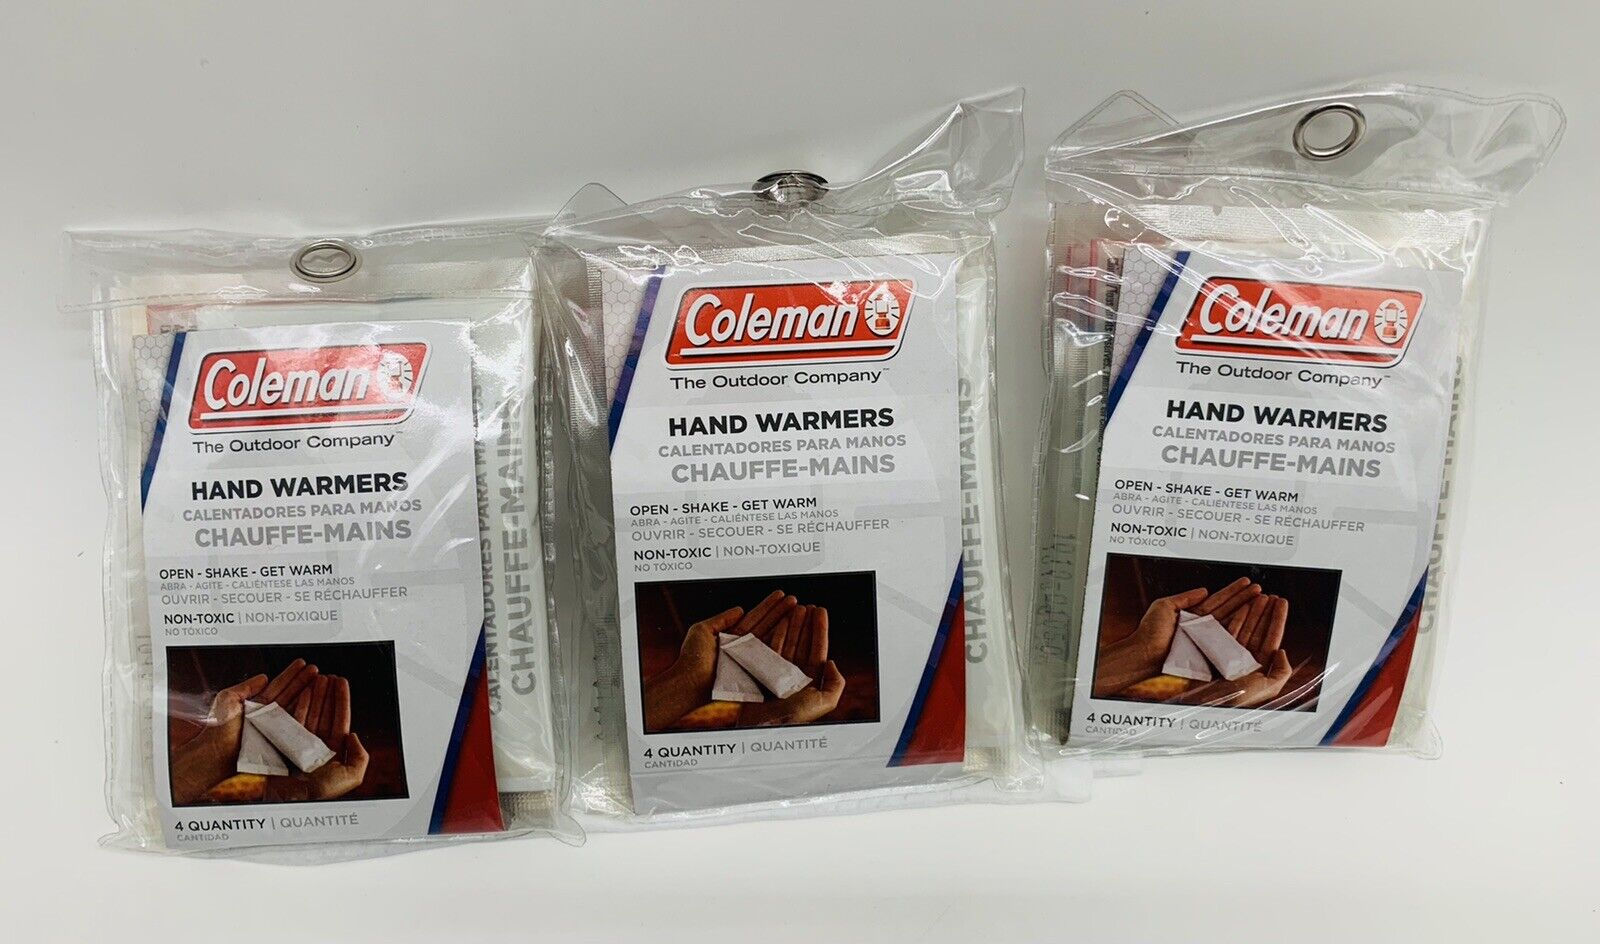 Lot of 3 Coleman Hand Warmers 4 Packs (8 Total) - Buy More And Save More New Coleman 20161116